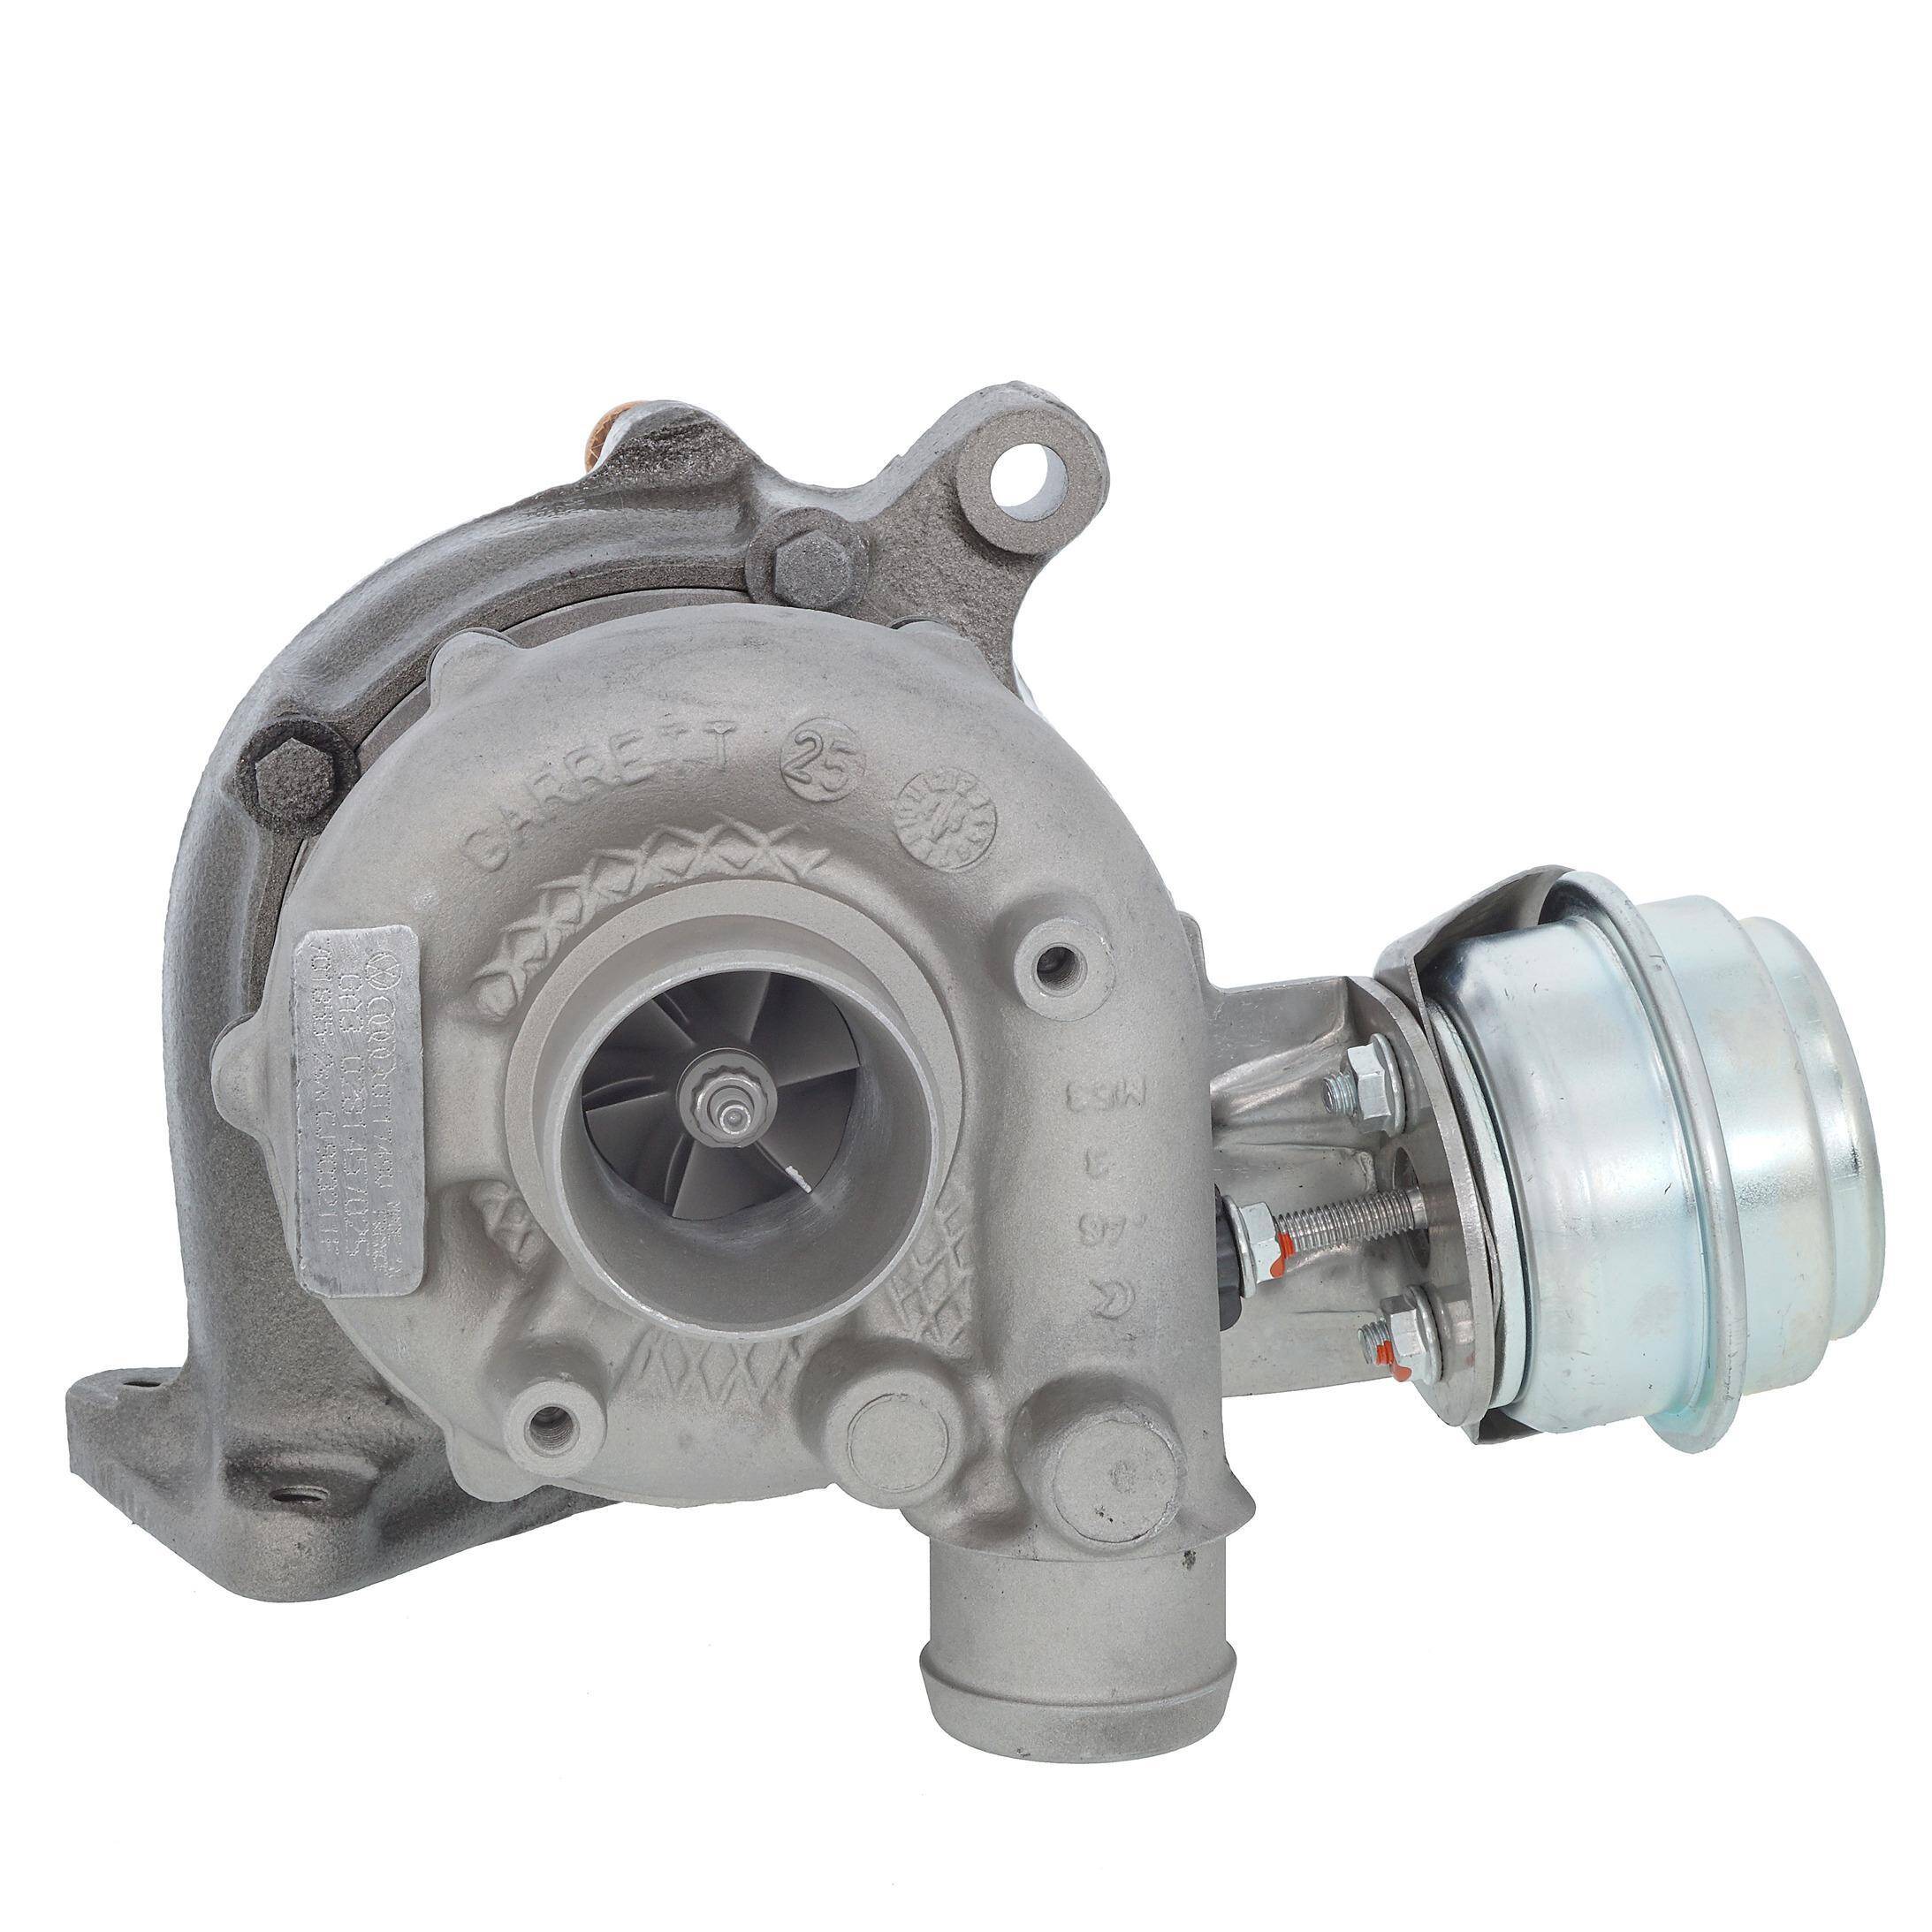 TURBOCHARGER TURBO REMANUFACTURED 701855-0002 701855-0002